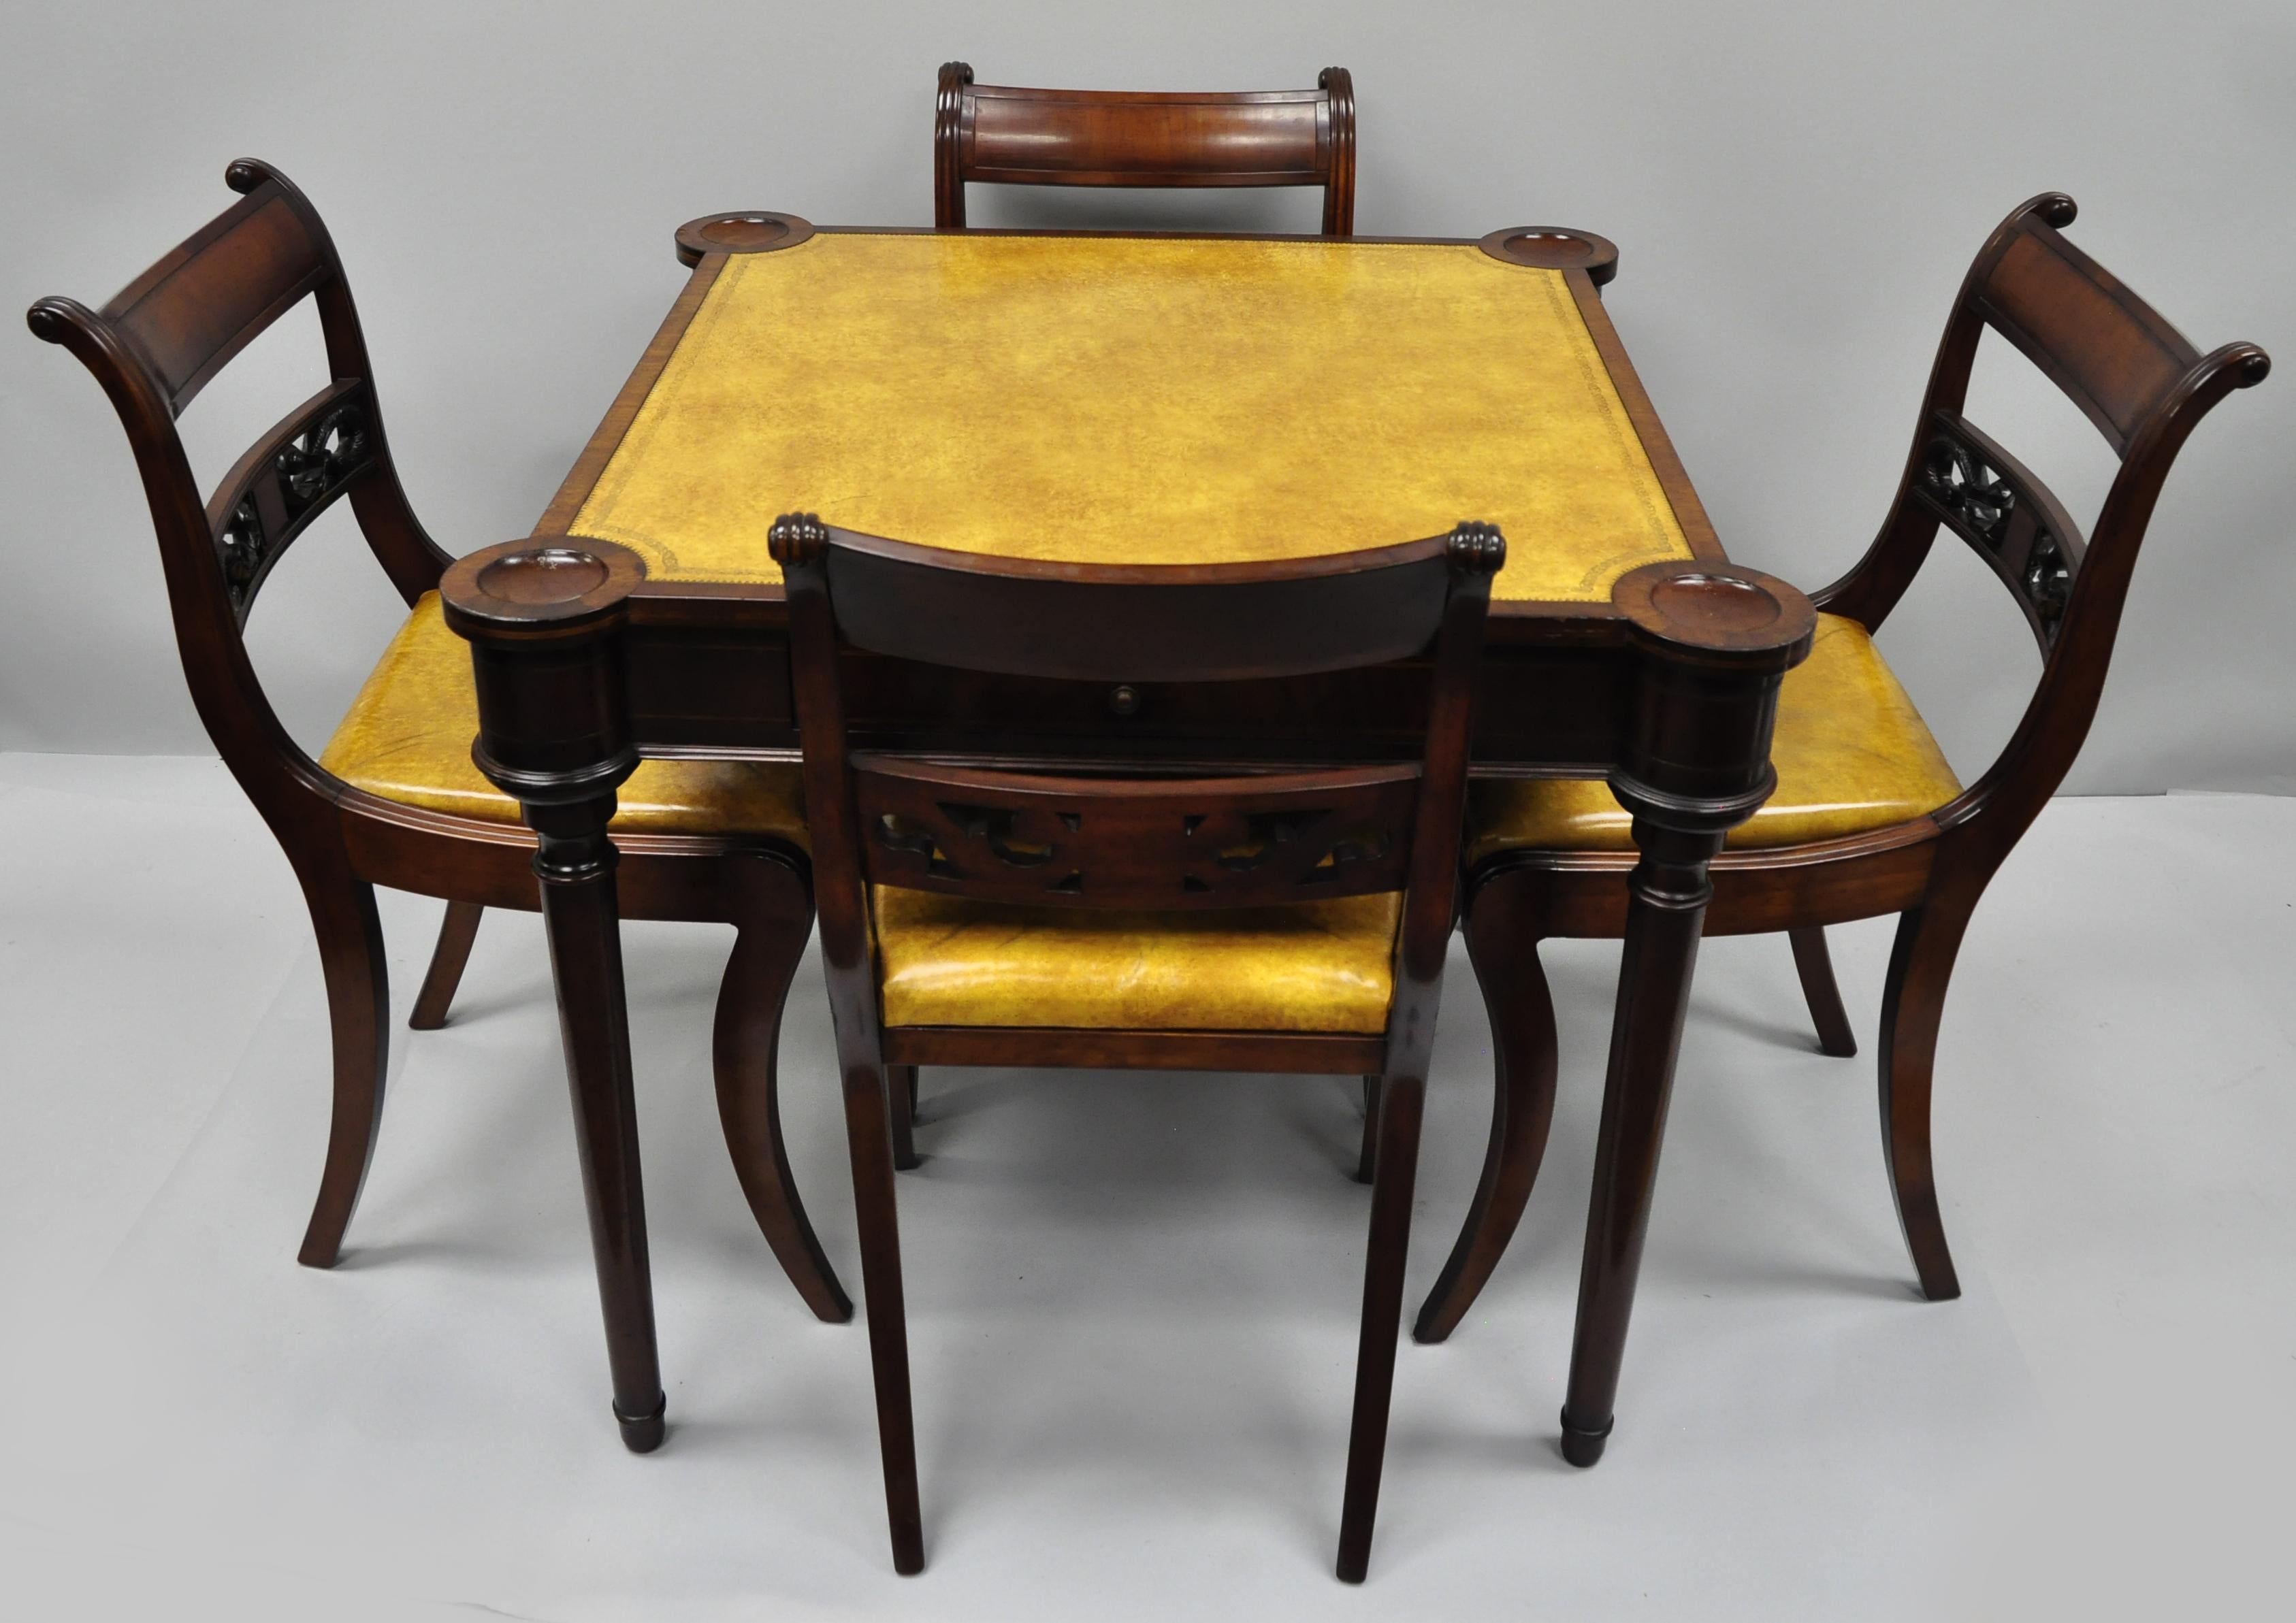 Vintage English Regency Style Yellow Leather Top One Drawer Card Game Table 5